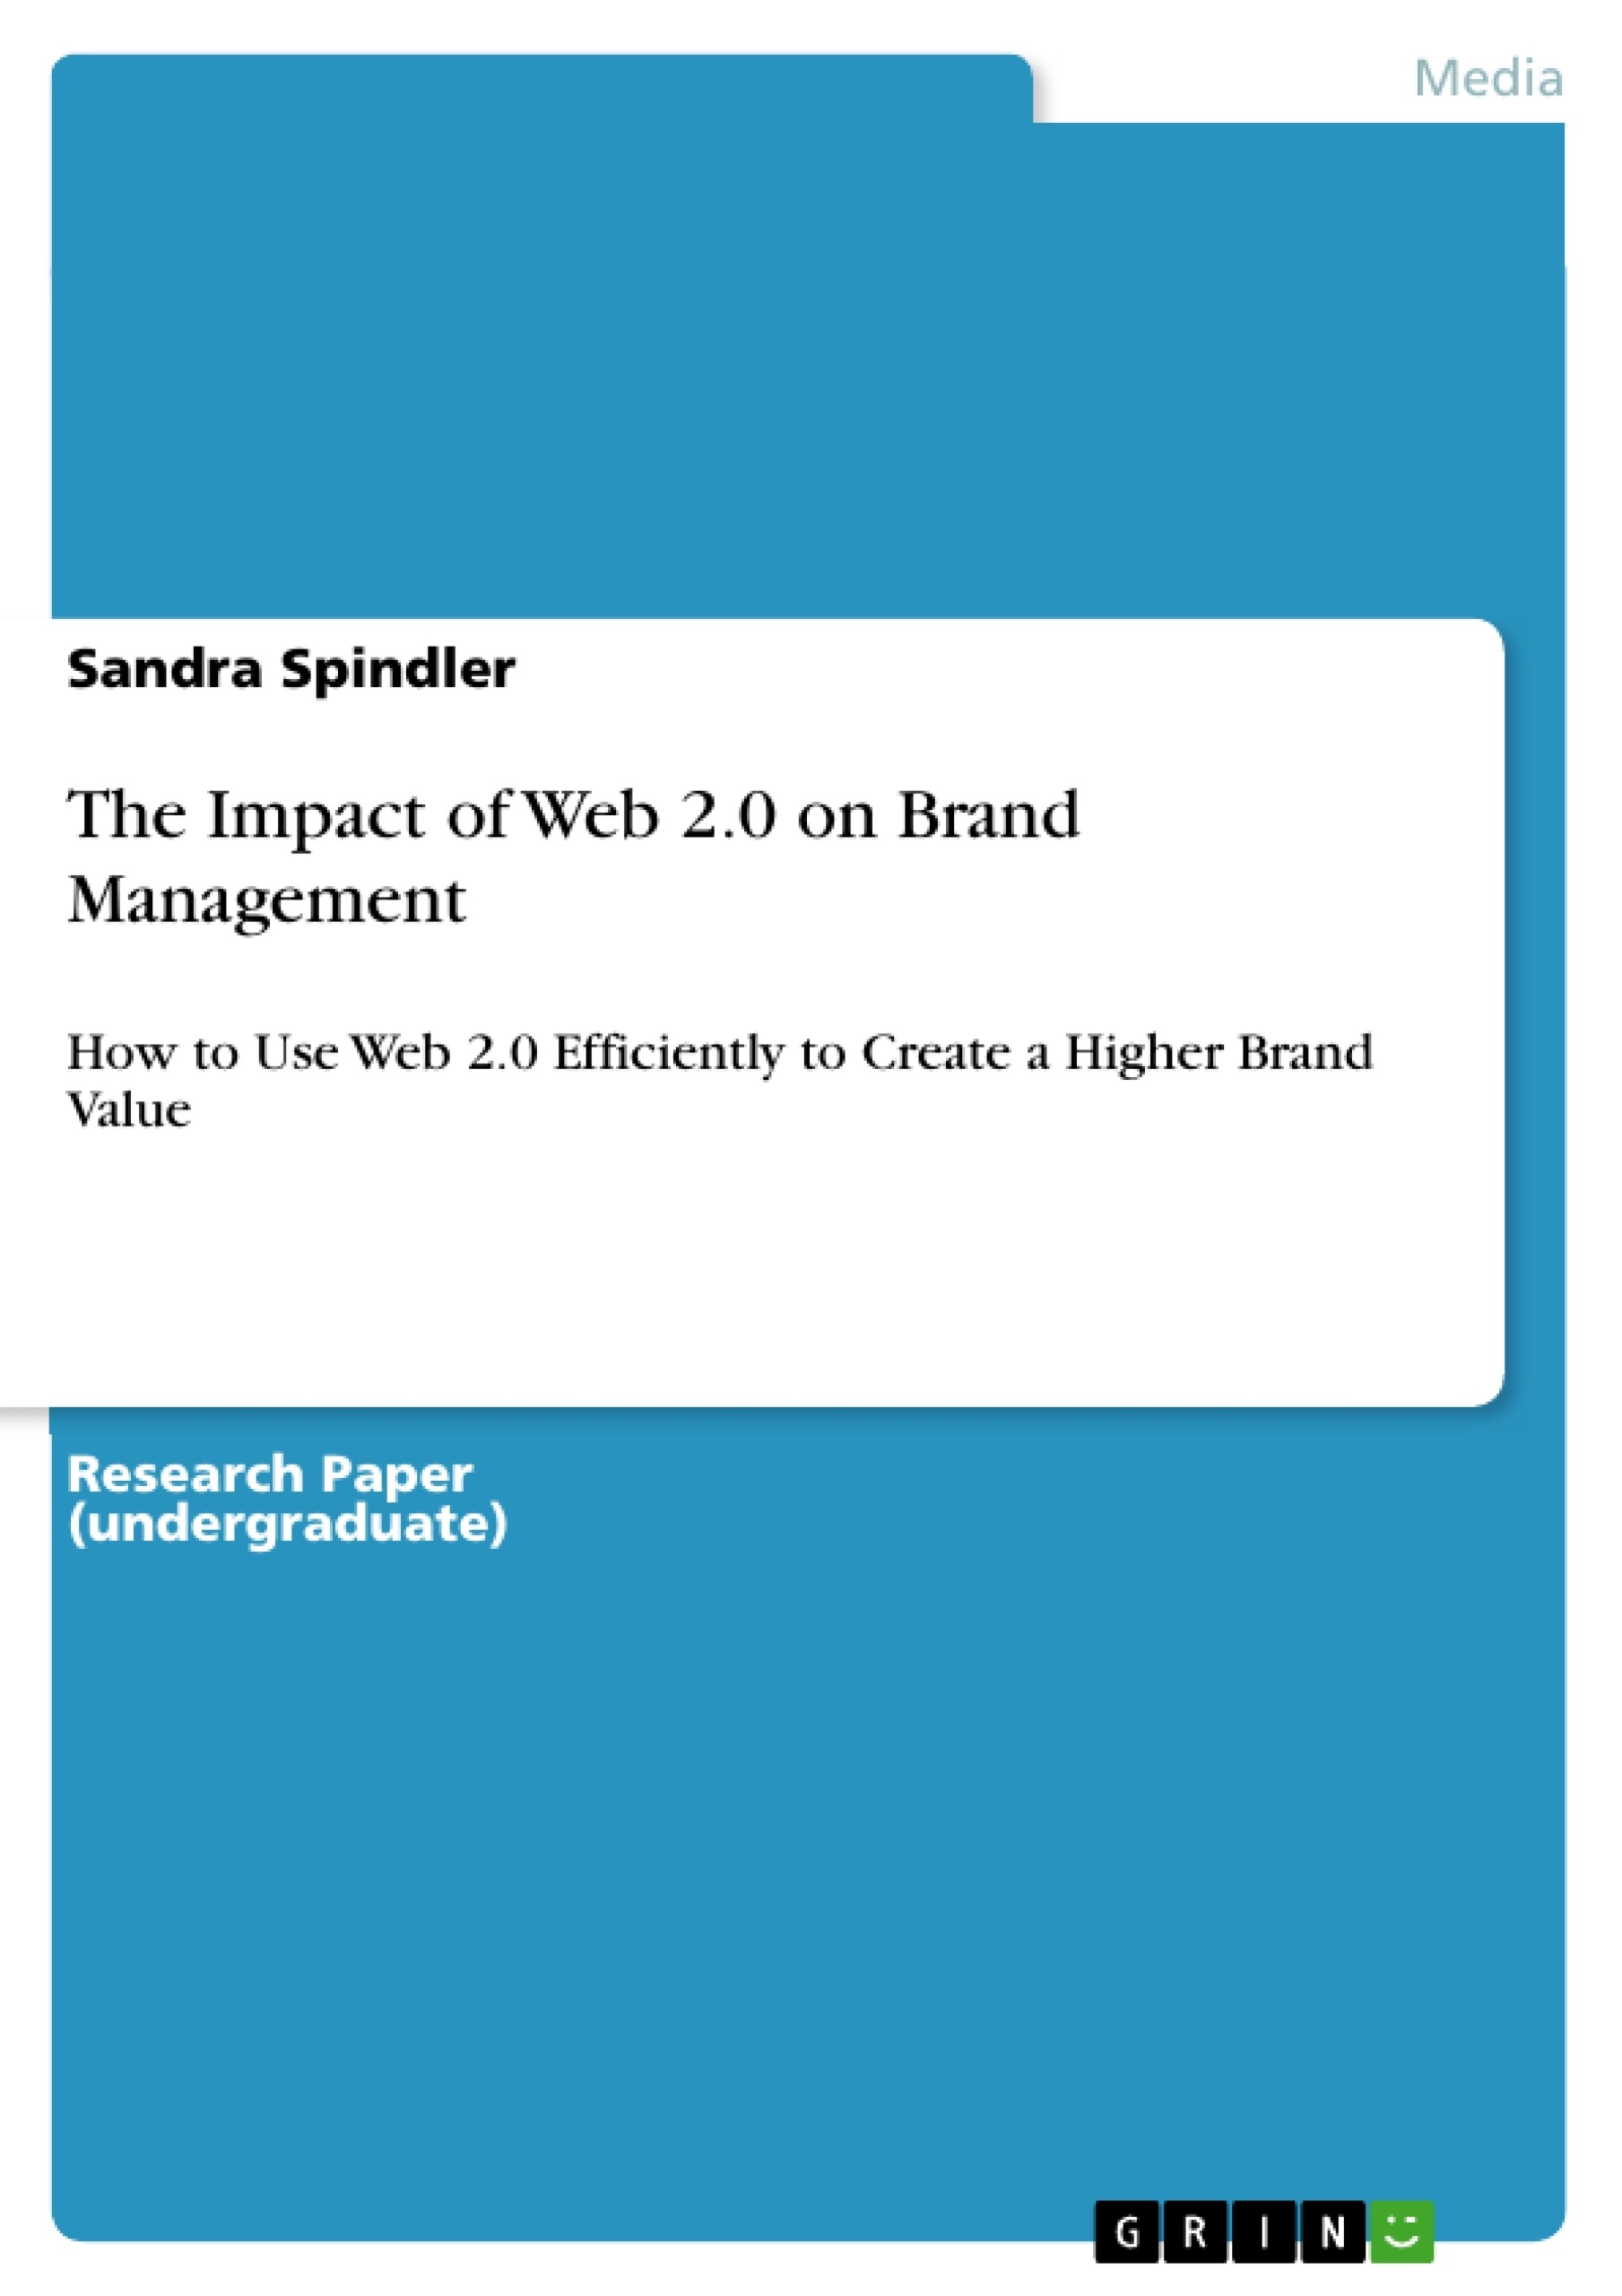 Title: The Impact of Web 2.0 on Brand Management